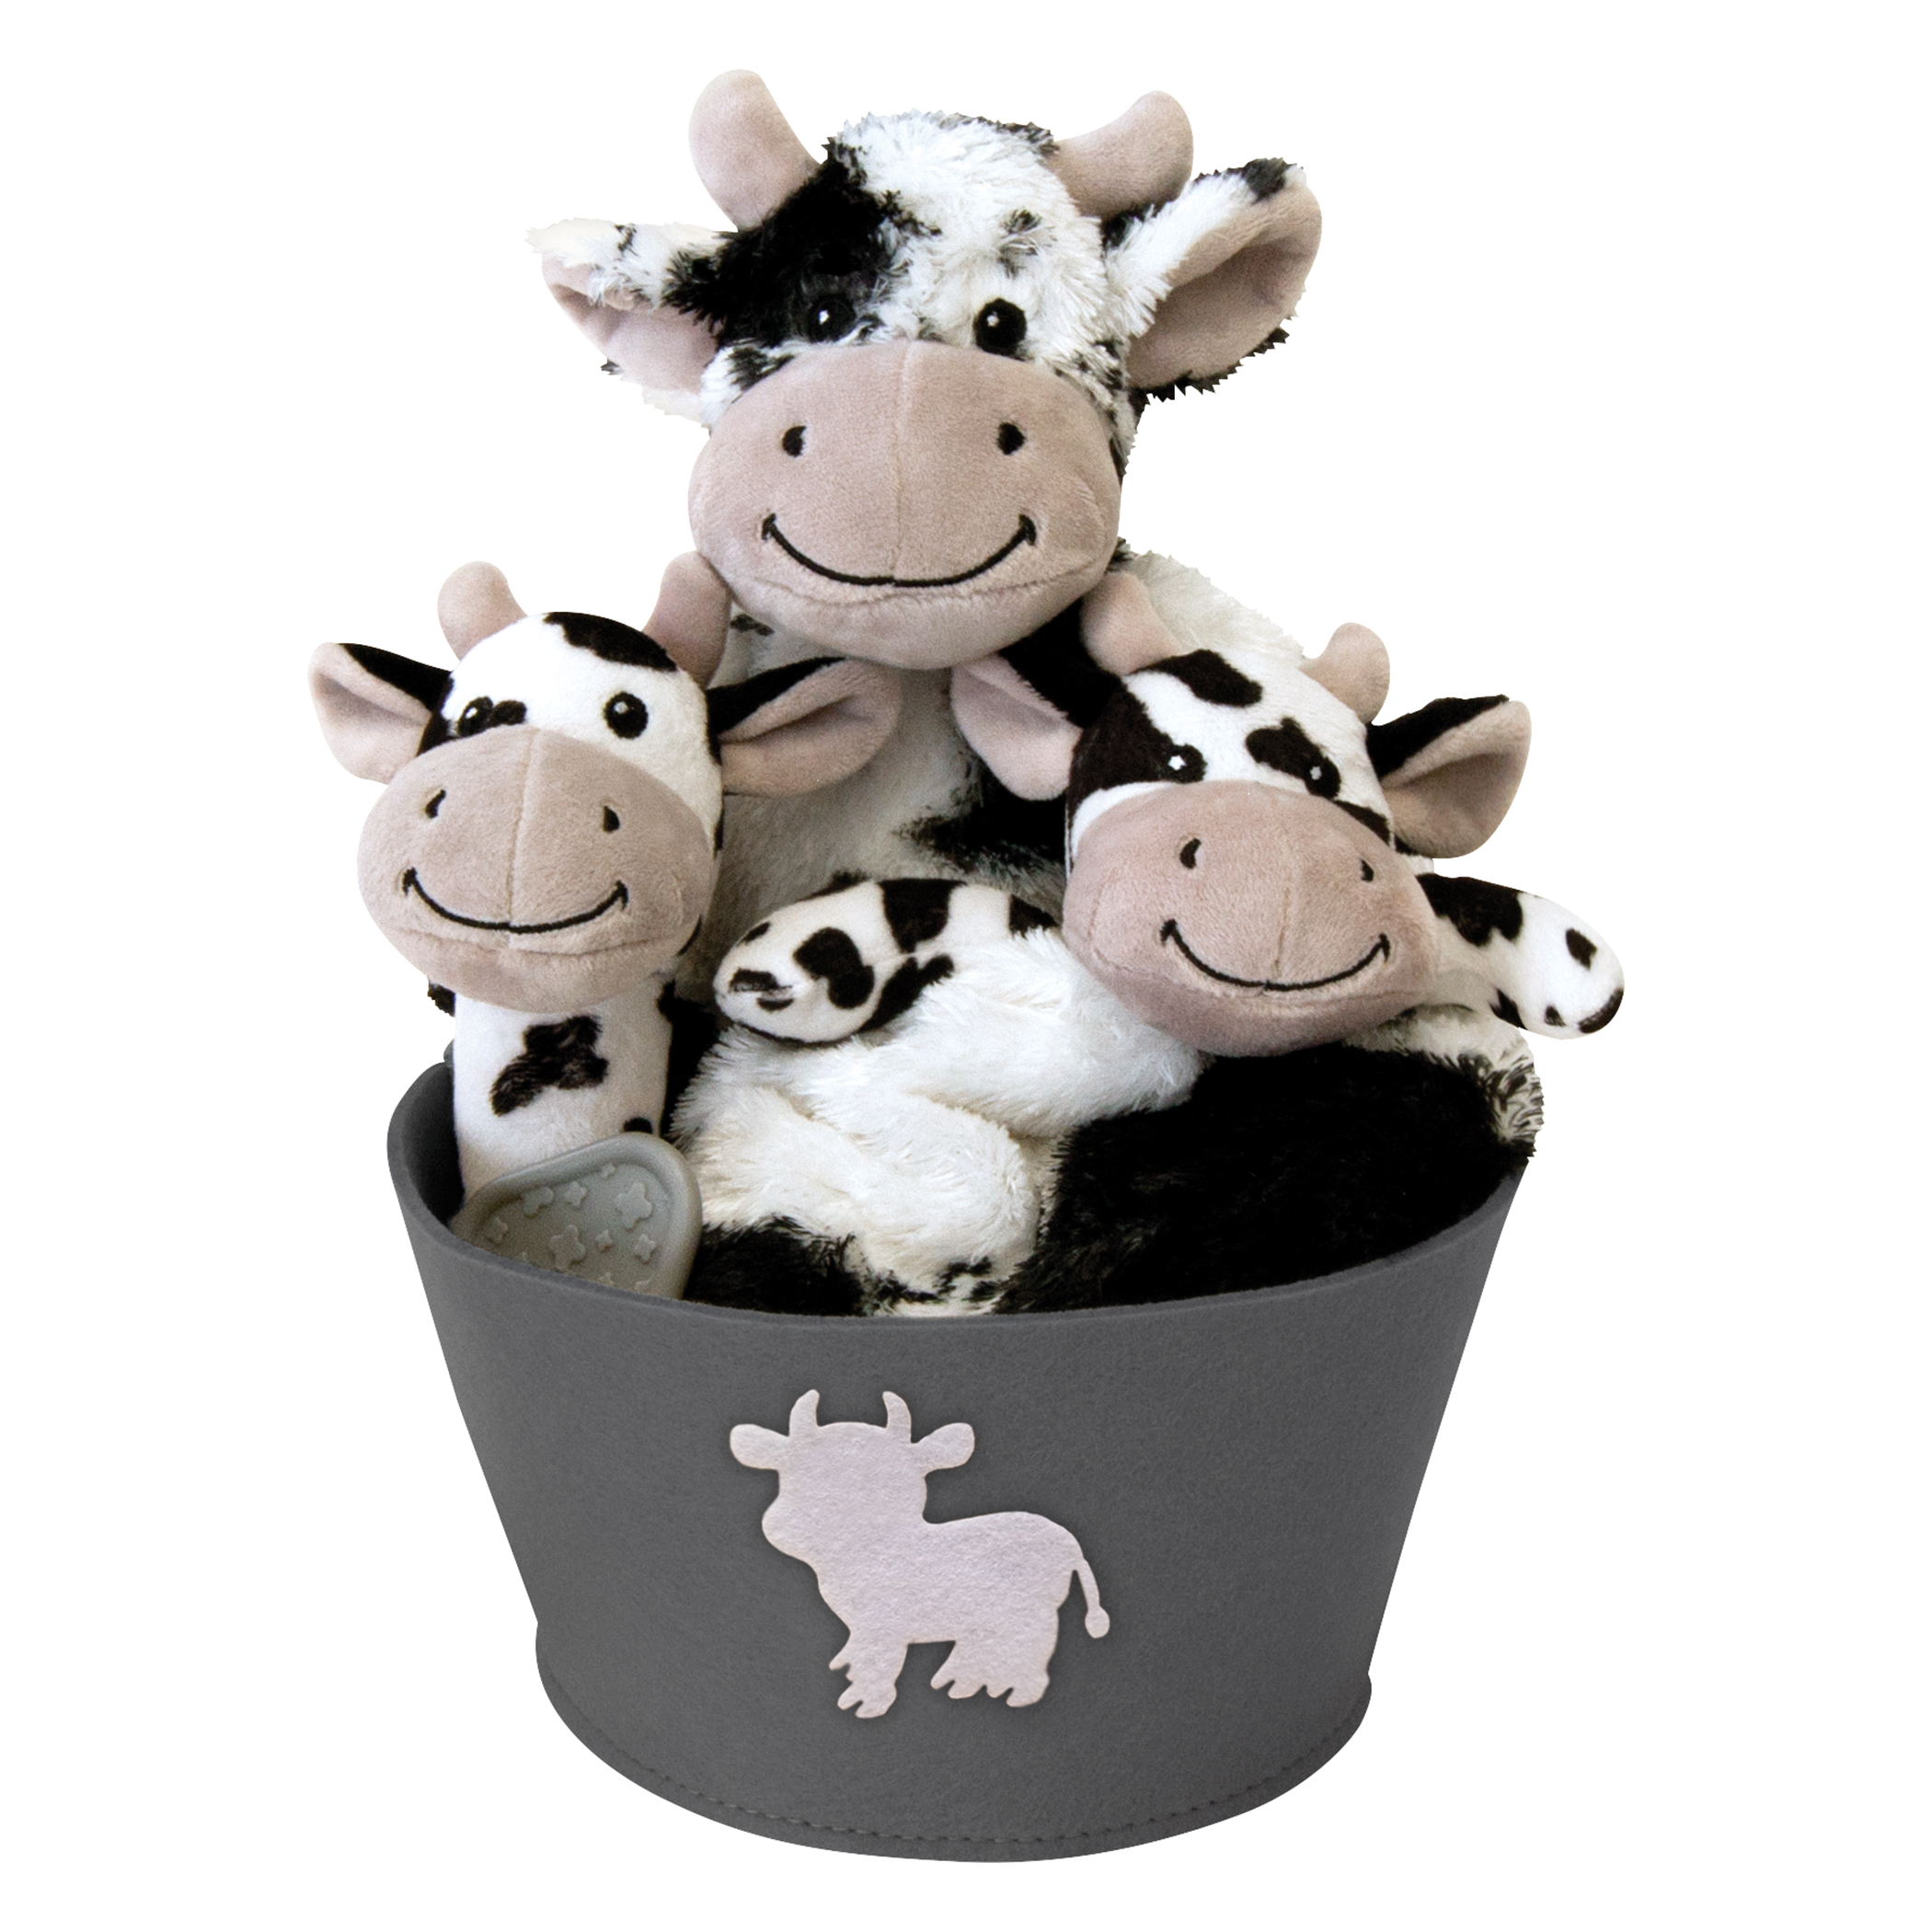 Trend Lab 9" Cow Bucket Plush Toys (4 Pieces) - image 1 of 4